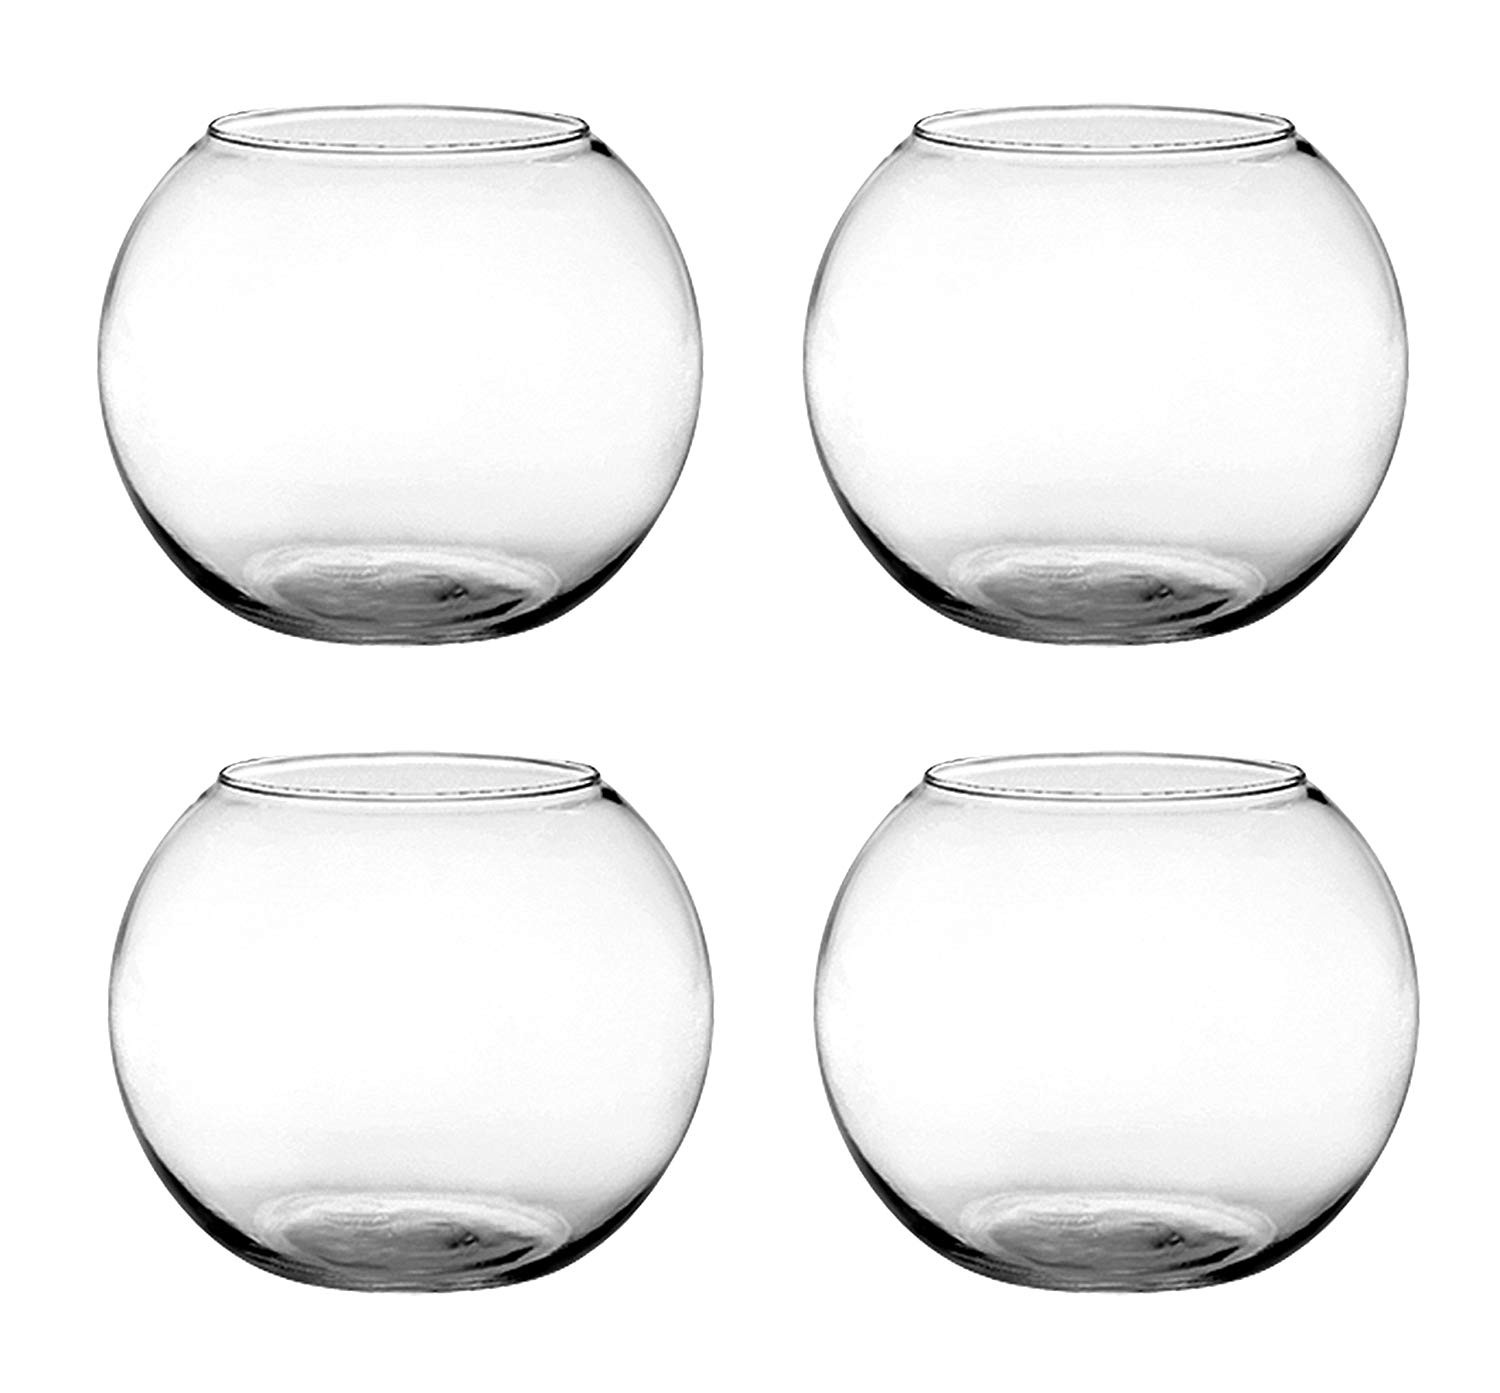 19 Unique Sea Glass Vase Filler 2024 free download sea glass vase filler of amazon com set of 4 syndicate sales 6 inches clear rose bowl with amazon com set of 4 syndicate sales 6 inches clear rose bowl bundled by maven gifts garden outdoor